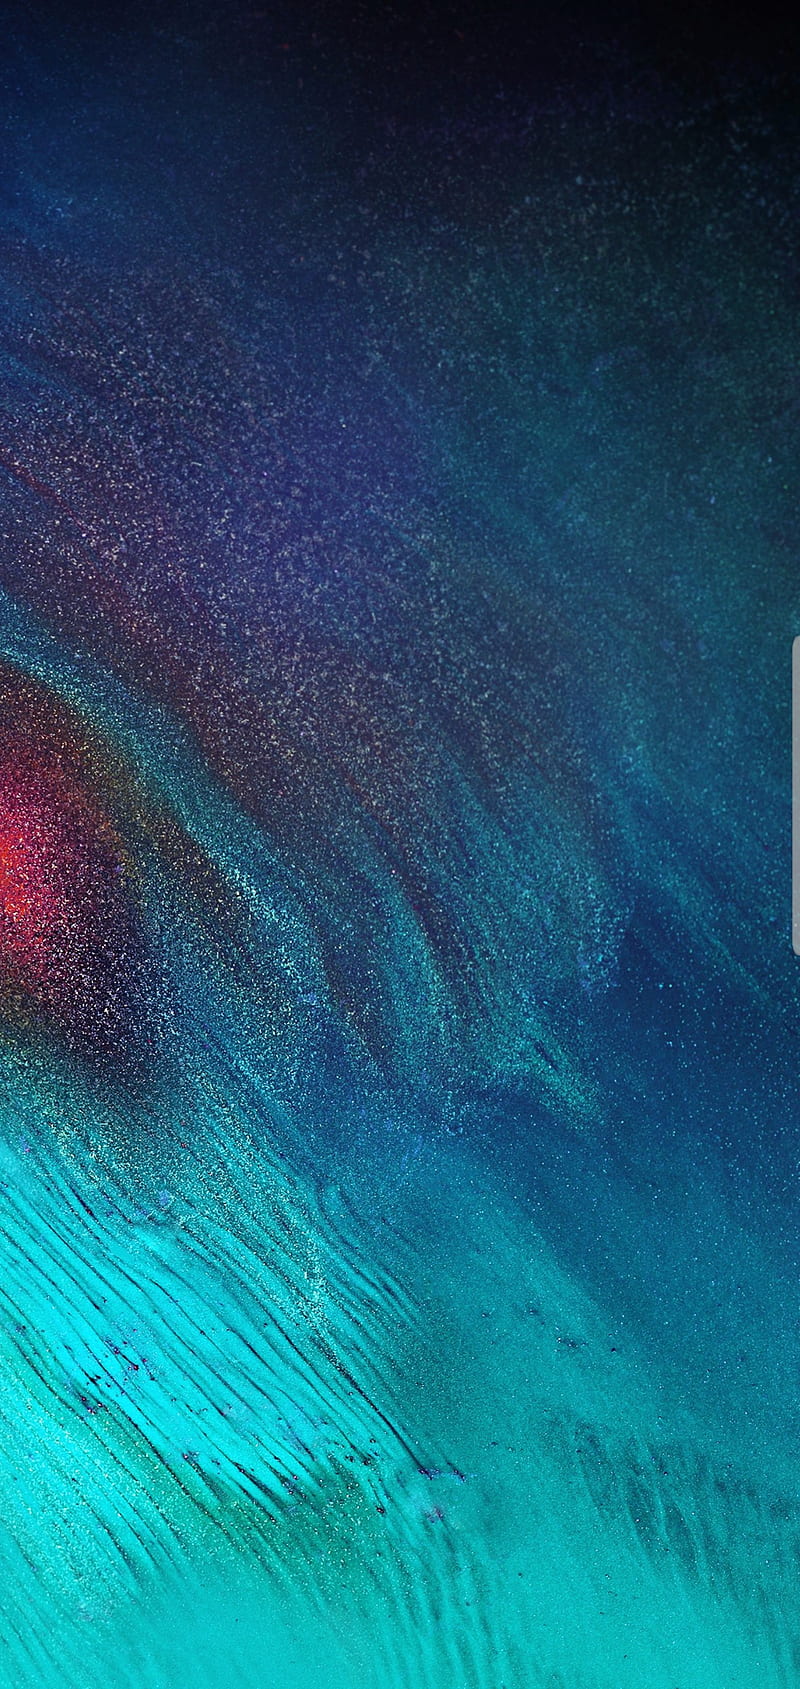 S 10 , s10, s10plus, galaxys10, s10 plus, samsungs10, samsung s10, note9, note10, note 9, HD phone wallpaper